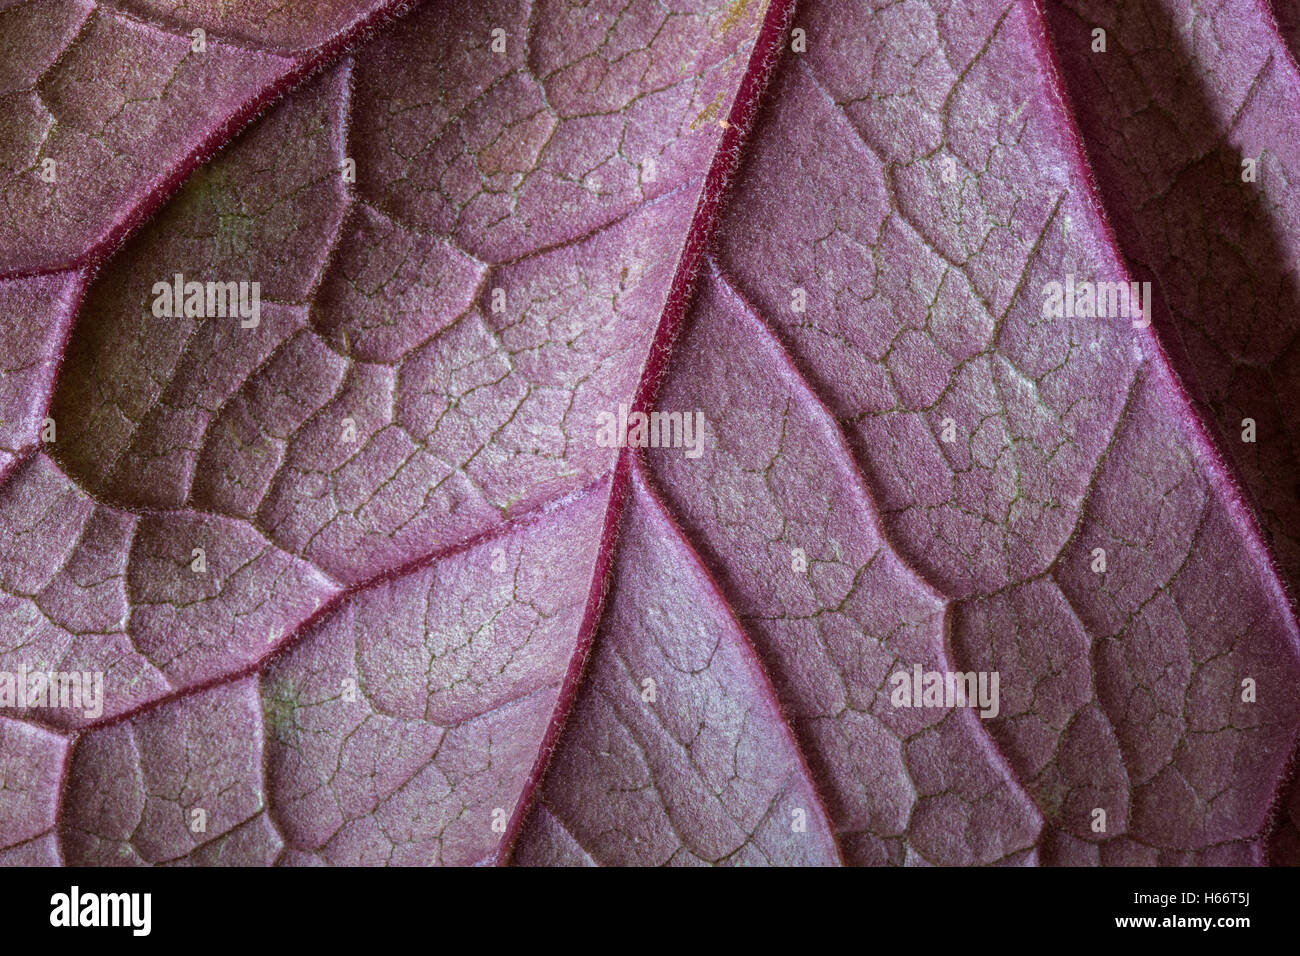 The underside of a purple leaf showing the small hairs and veins. Stock Photo